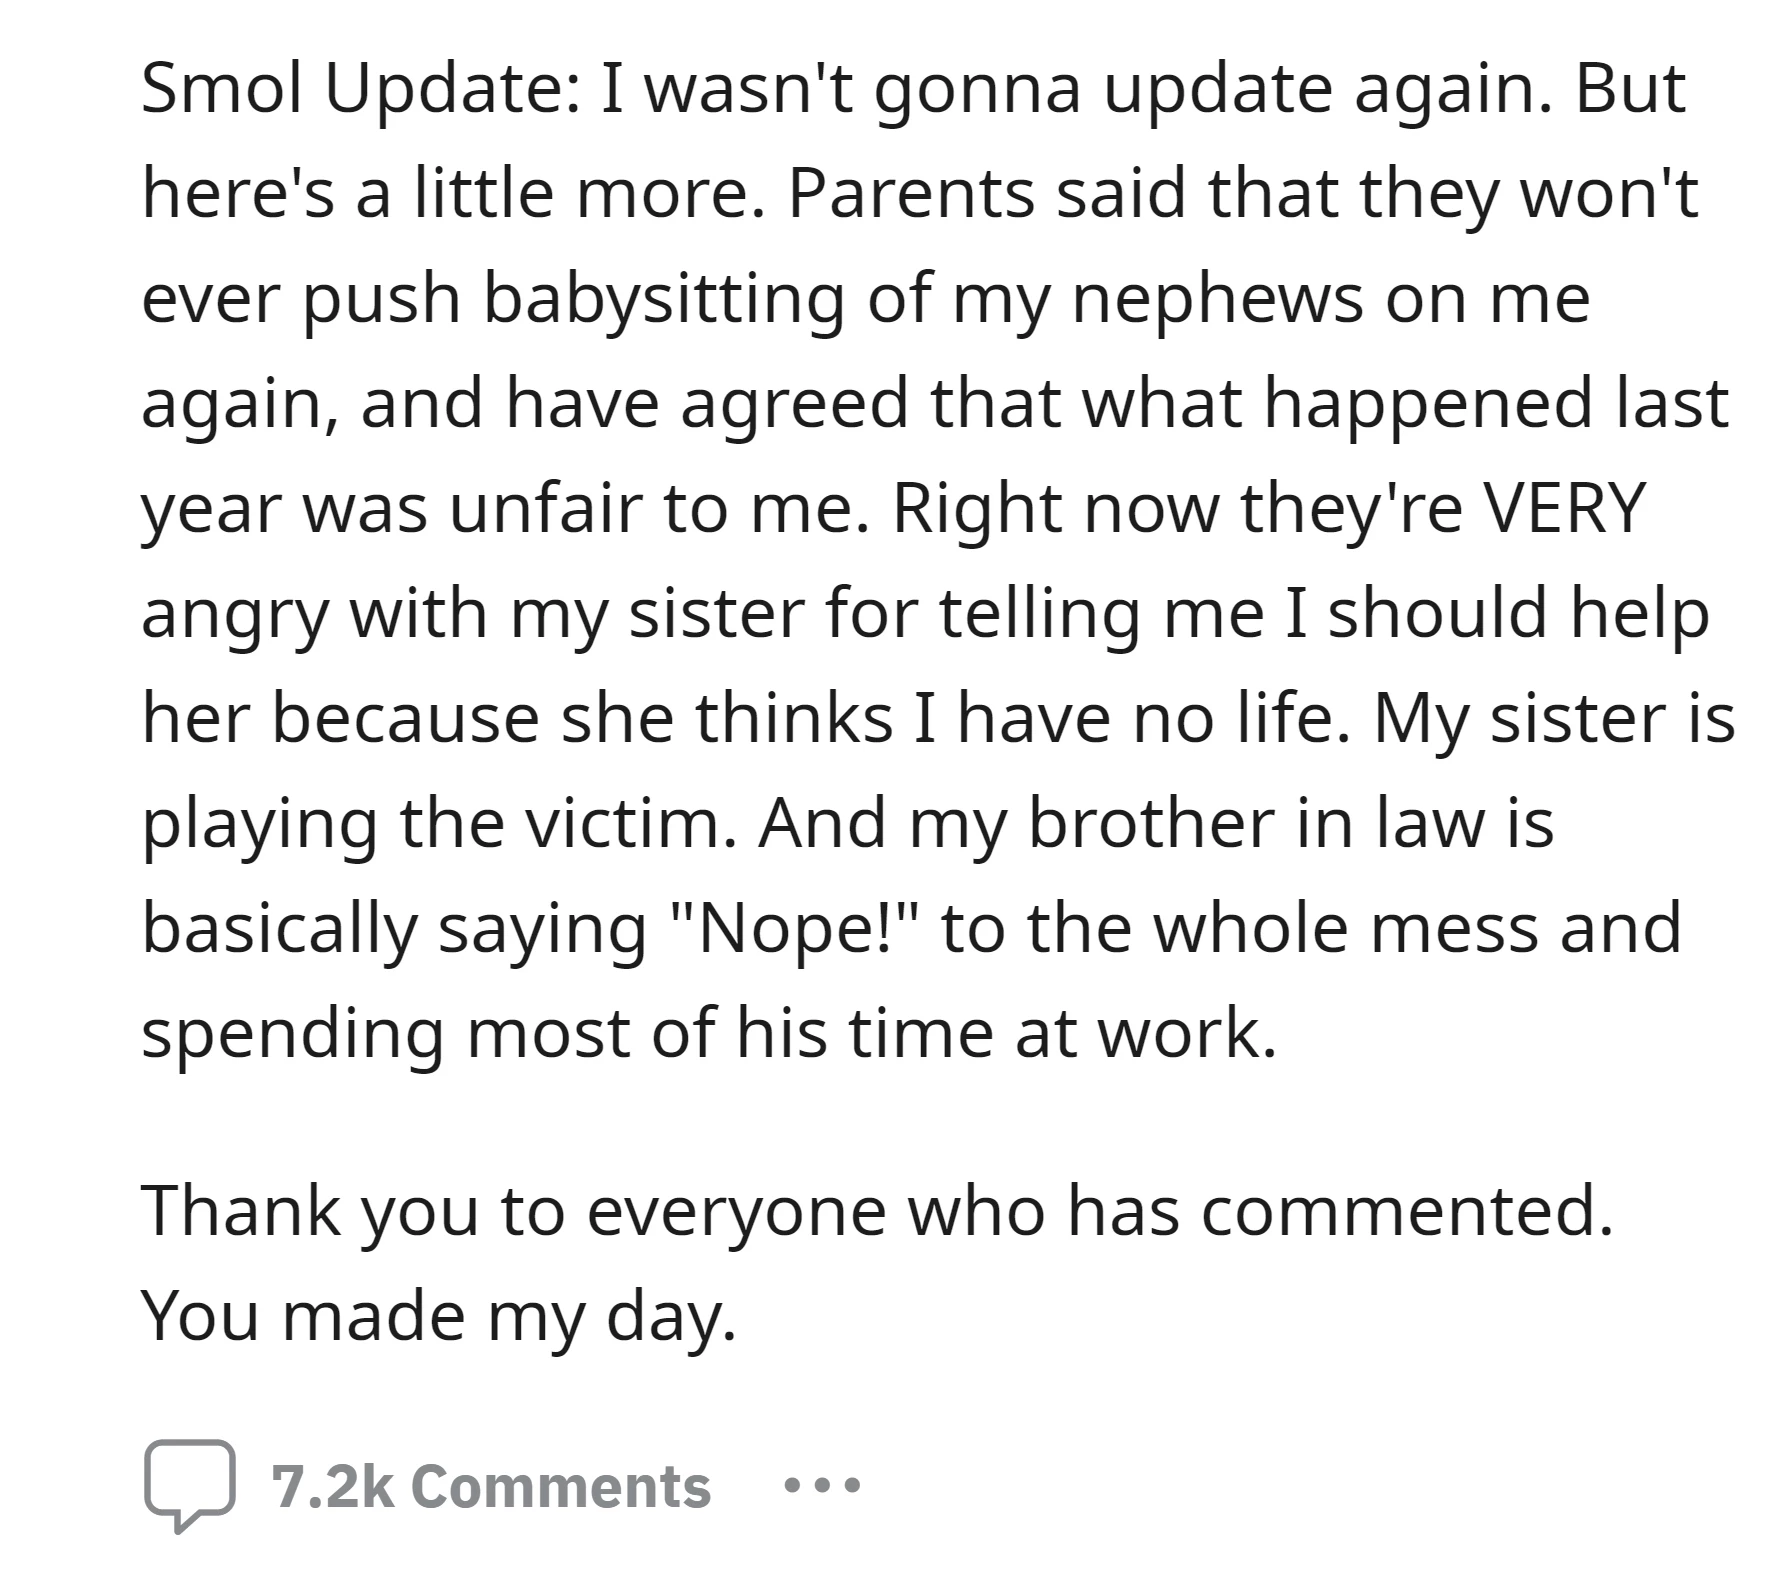 OP's parents have decided not to push babysitting on him anymore while the sister is still playing the victim